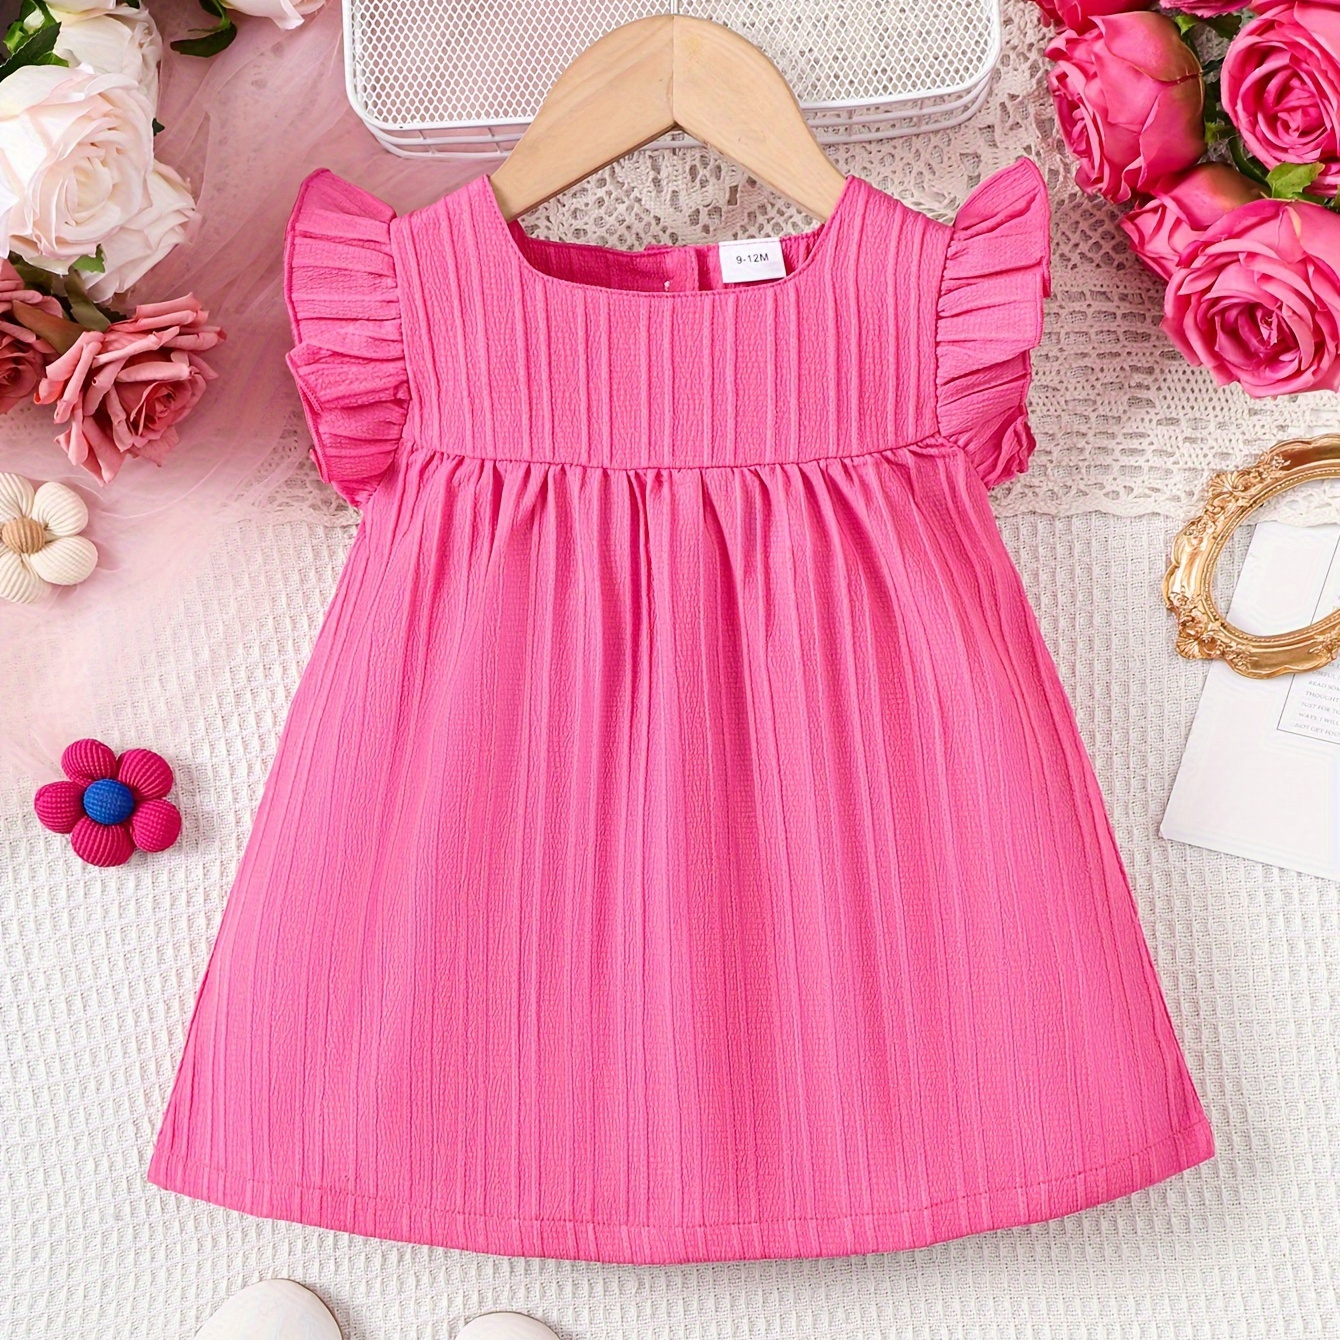 

Baby's Trendy Solid Color Textured Dress, Casual Square Neck Cap Sleeve Dress, Infant & Toddler Girl's Clothing For Summer/spring, As Gift